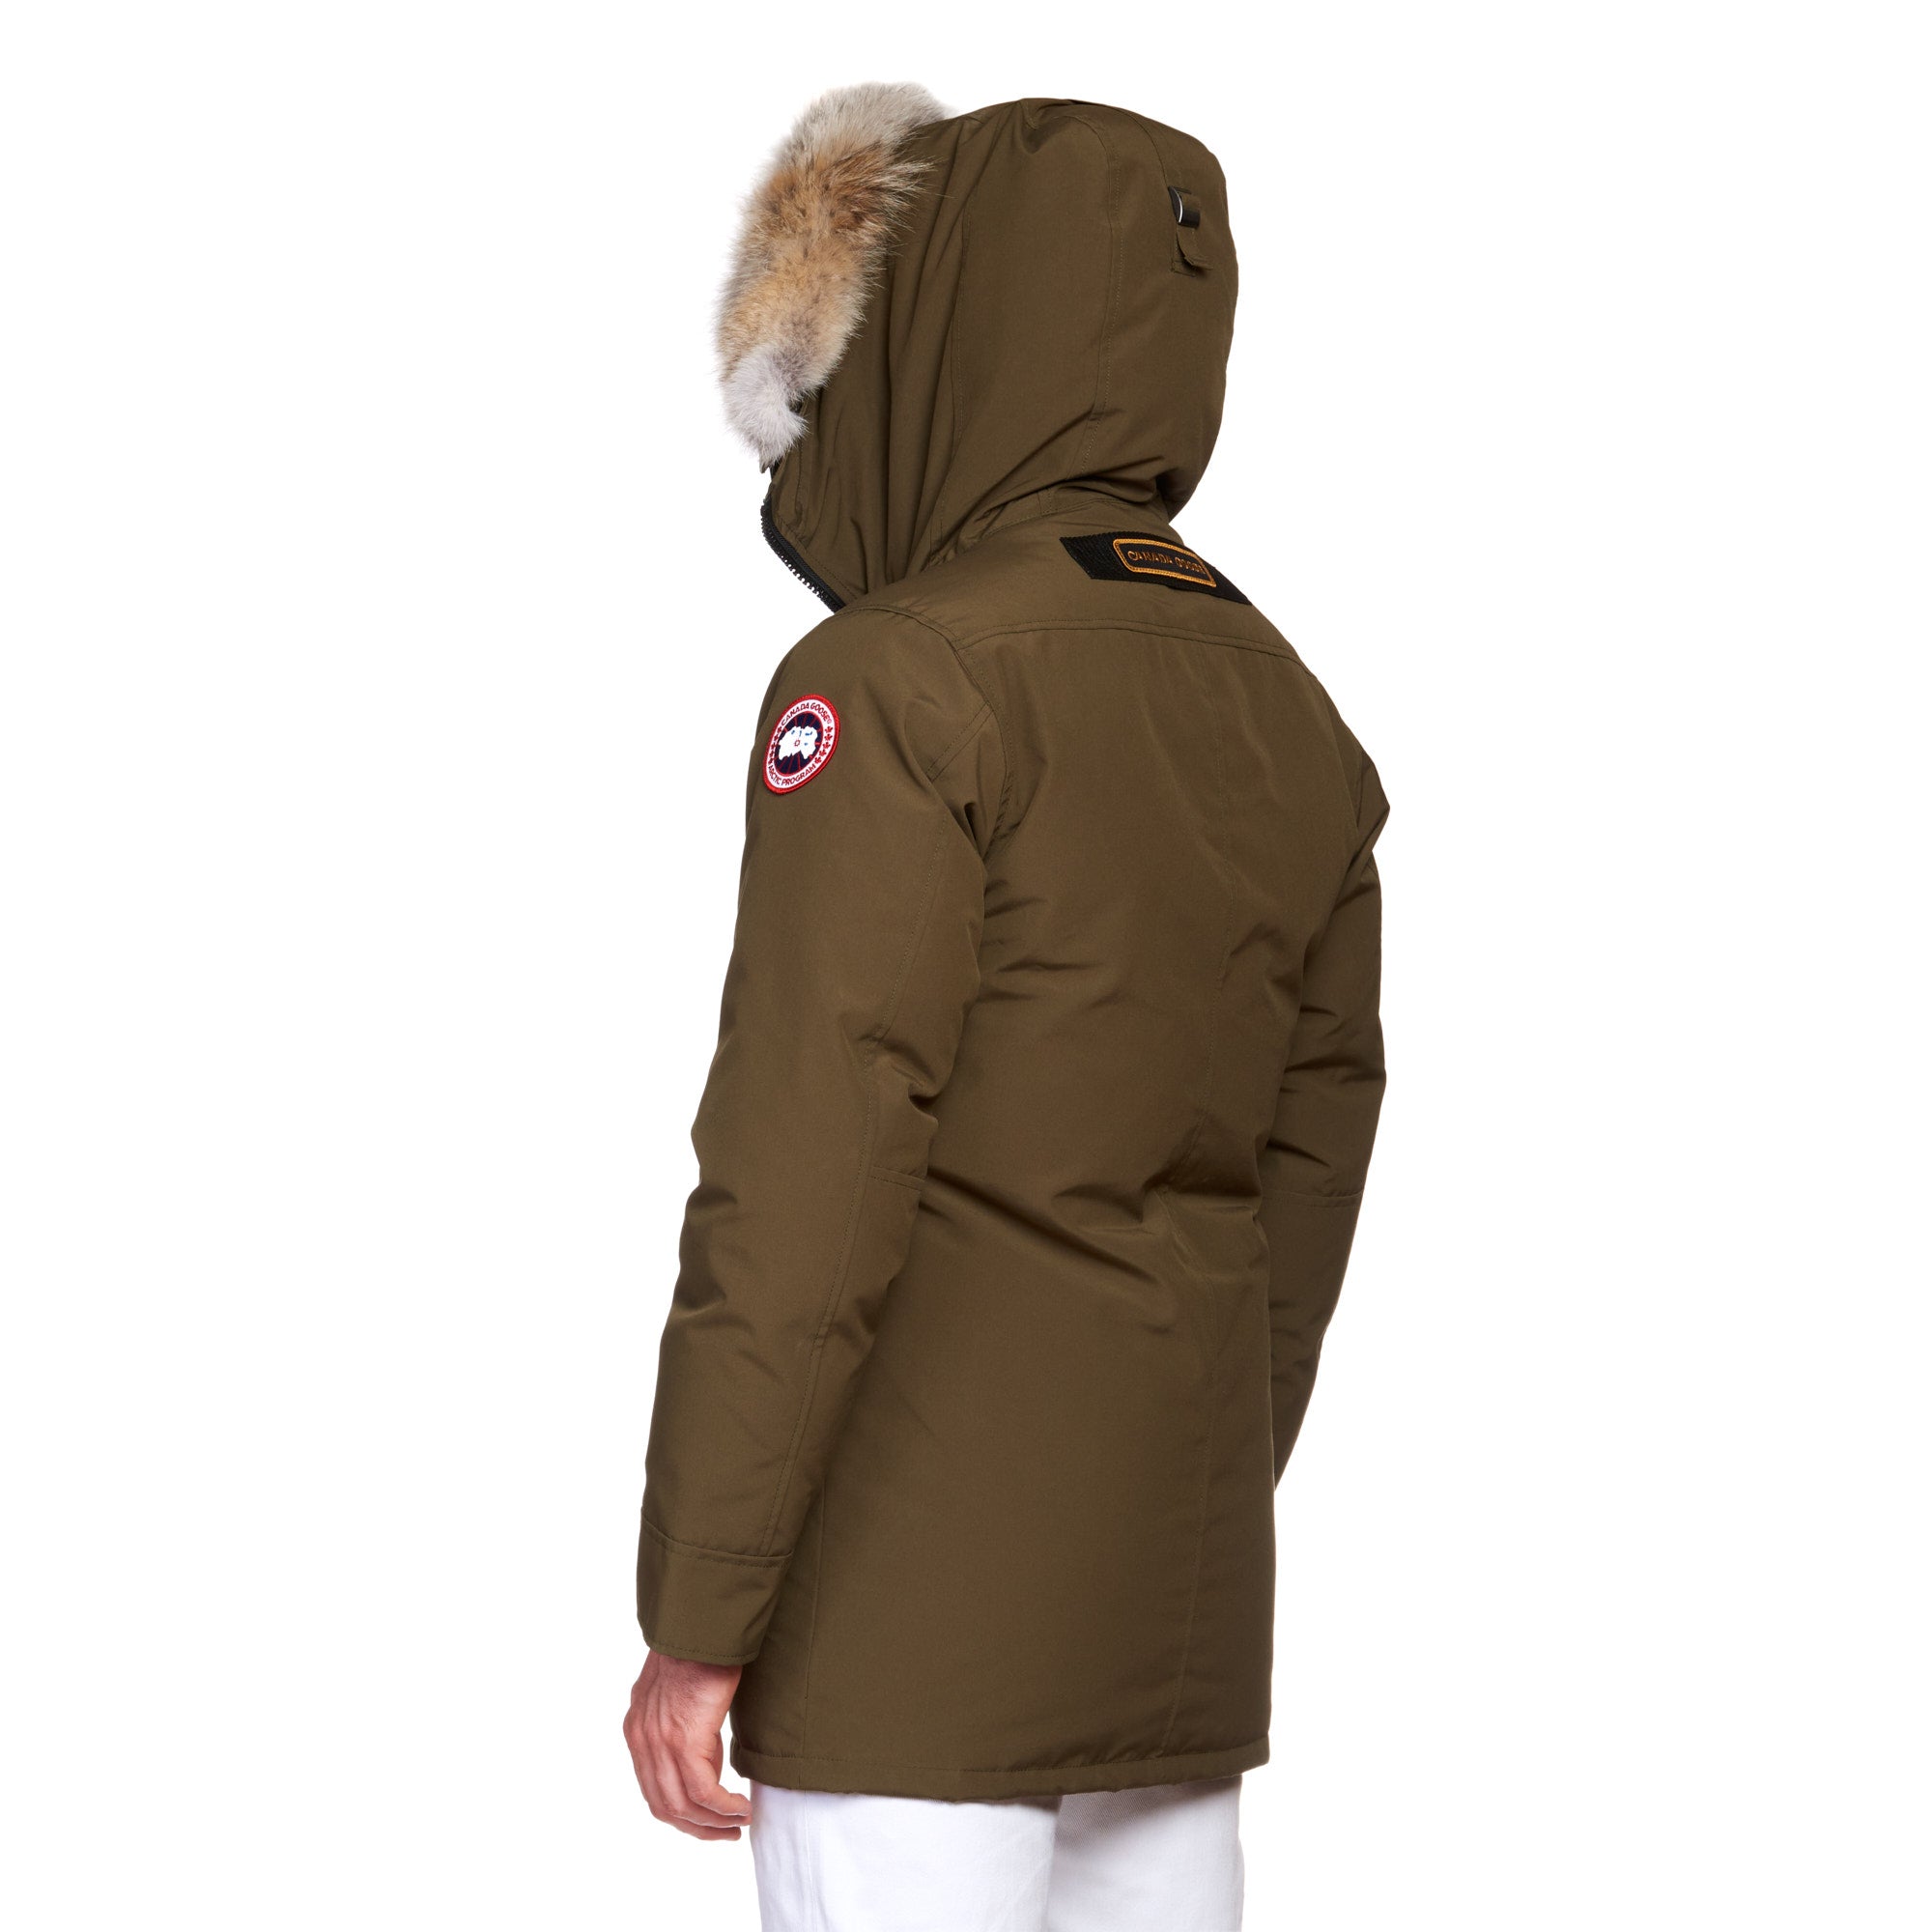 CANADA GOOSE Chateau Parka 3426M 49 Military Green Down Jacket Size S Fur Ruff CANADA GOOSE